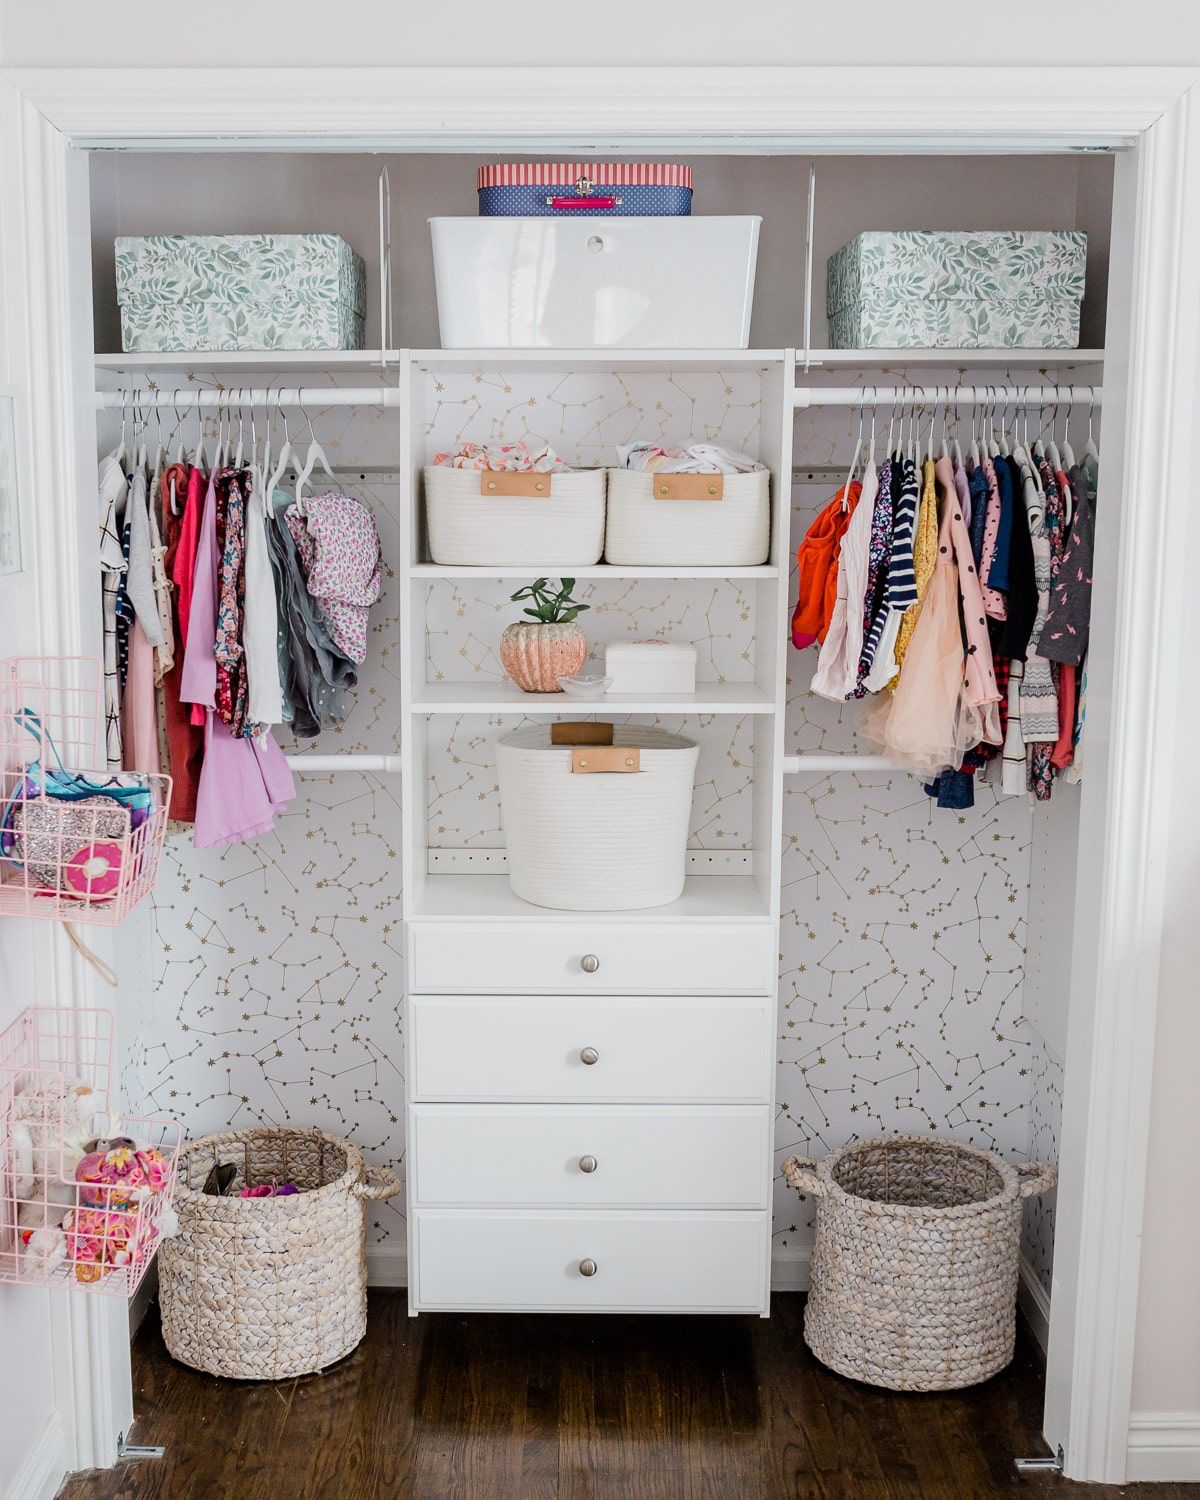 Tips for Creating an Organized Kids Closet